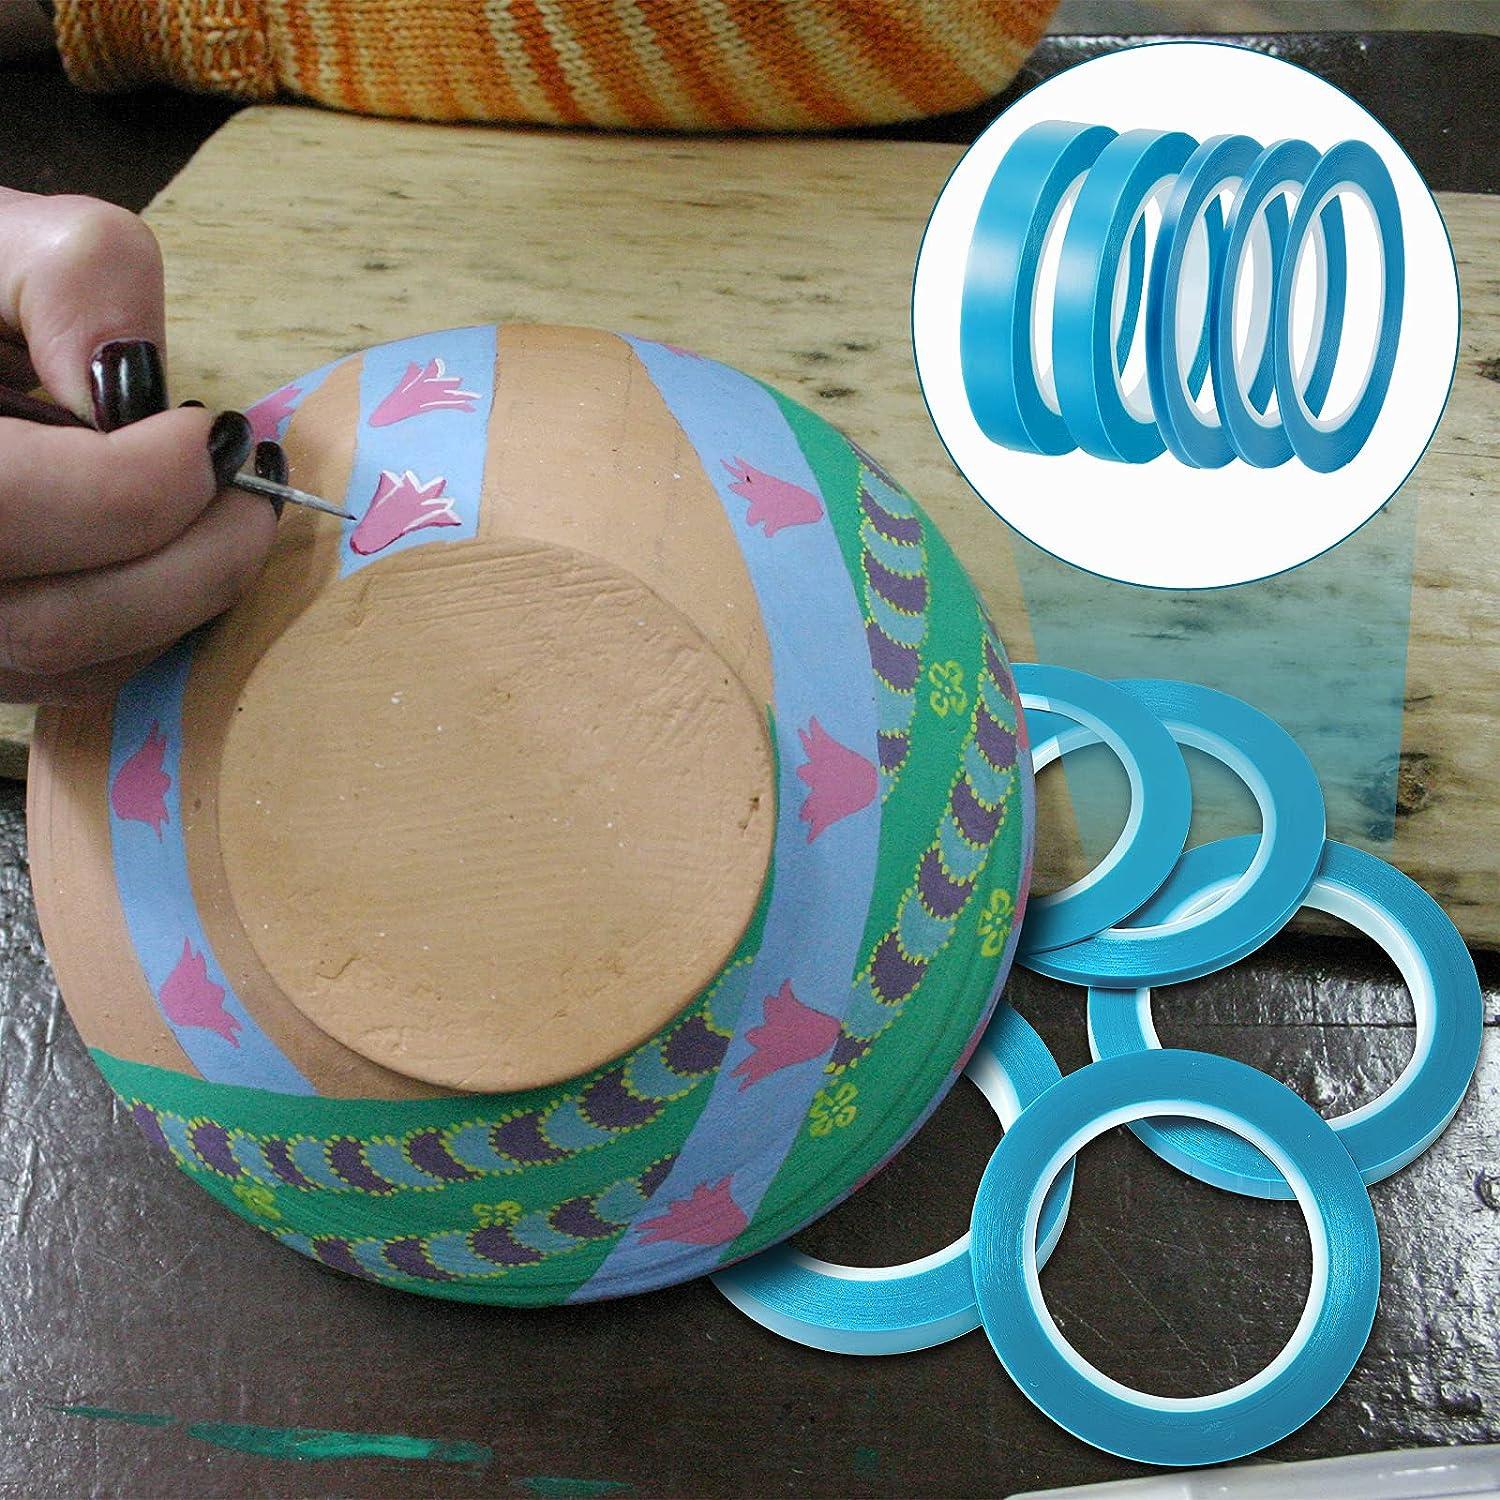 5 Rolls of Vinyl Tape Masking Tape Masking Tape Automotive Car Auto Paint  for Curves High Temperature Vinyl Low Tack 1/16 Inch 1/8 Inch 1/4 Inch 1/2  Inch 3/4 Inch